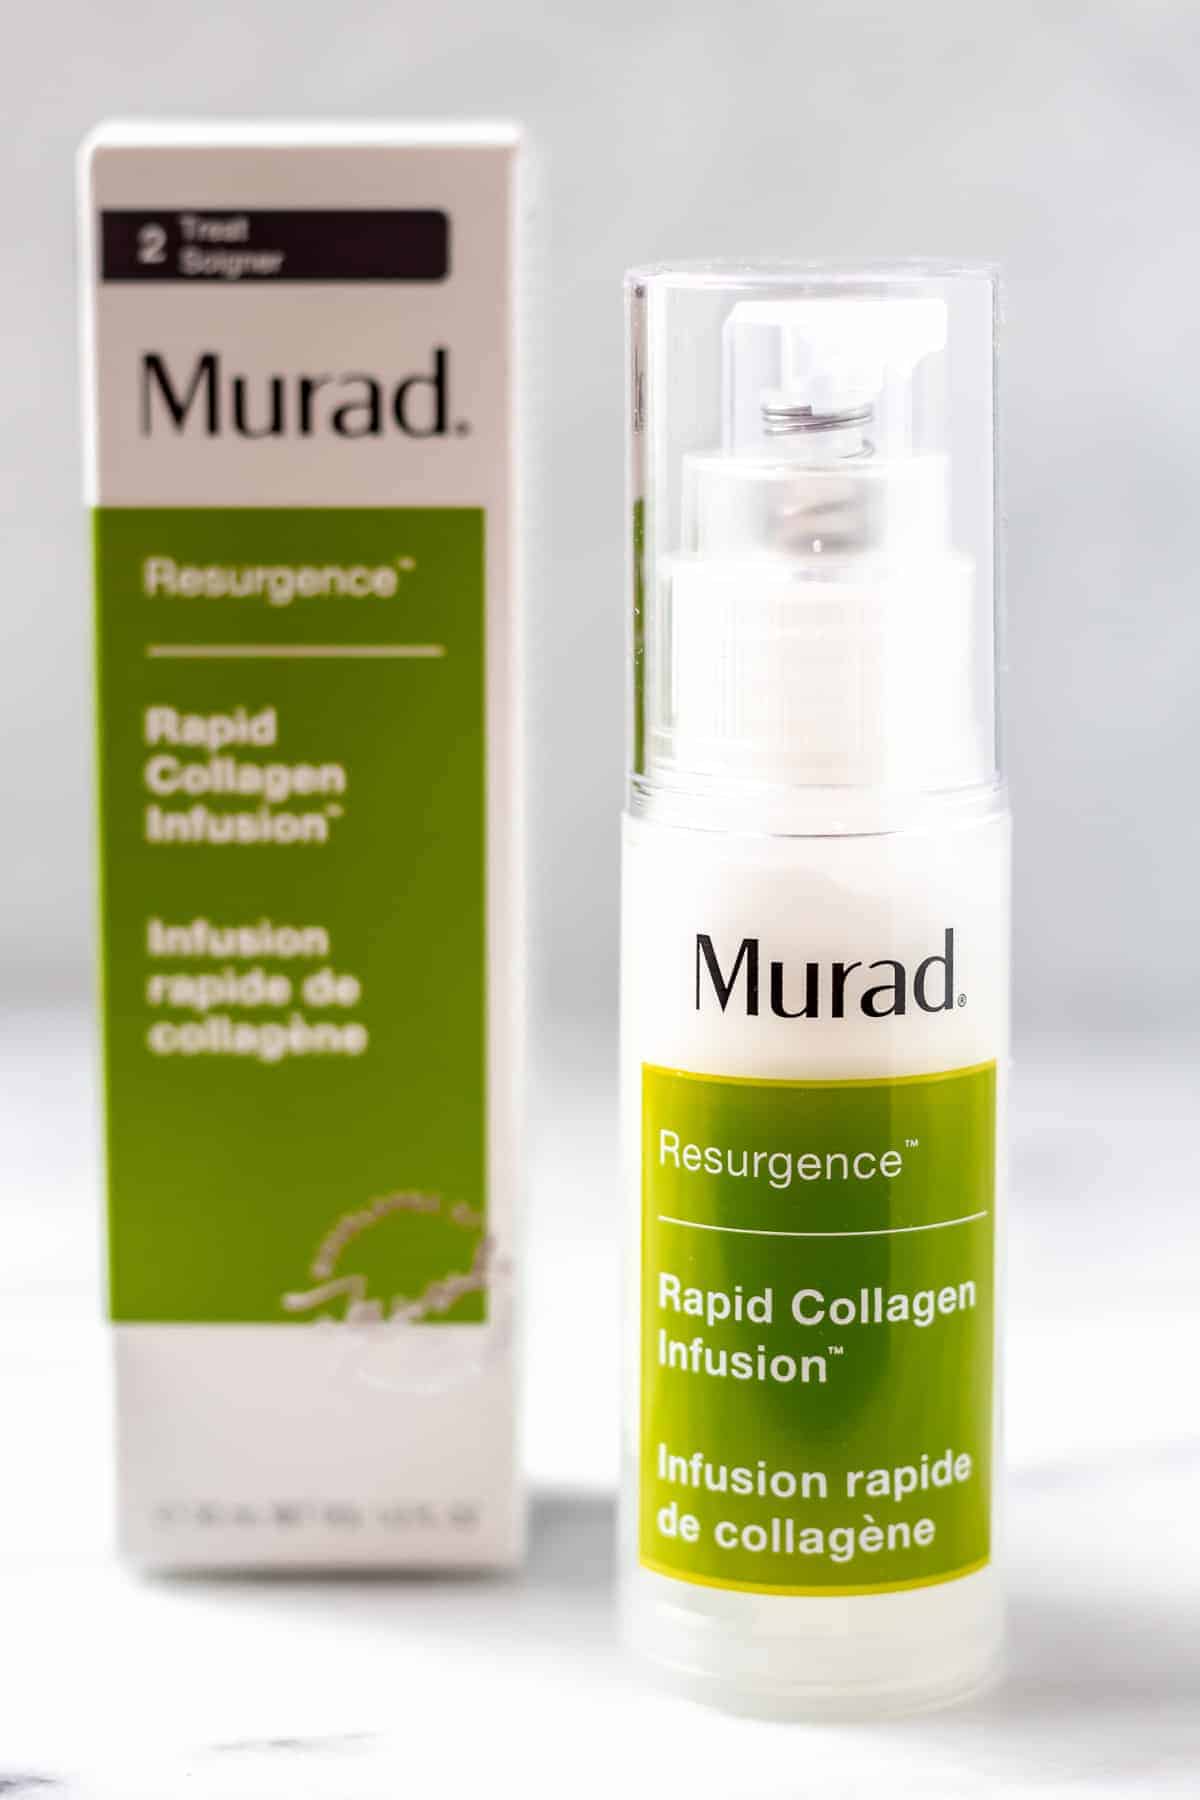 Murad Rapid Collagen Infusion tube and box on a gray background